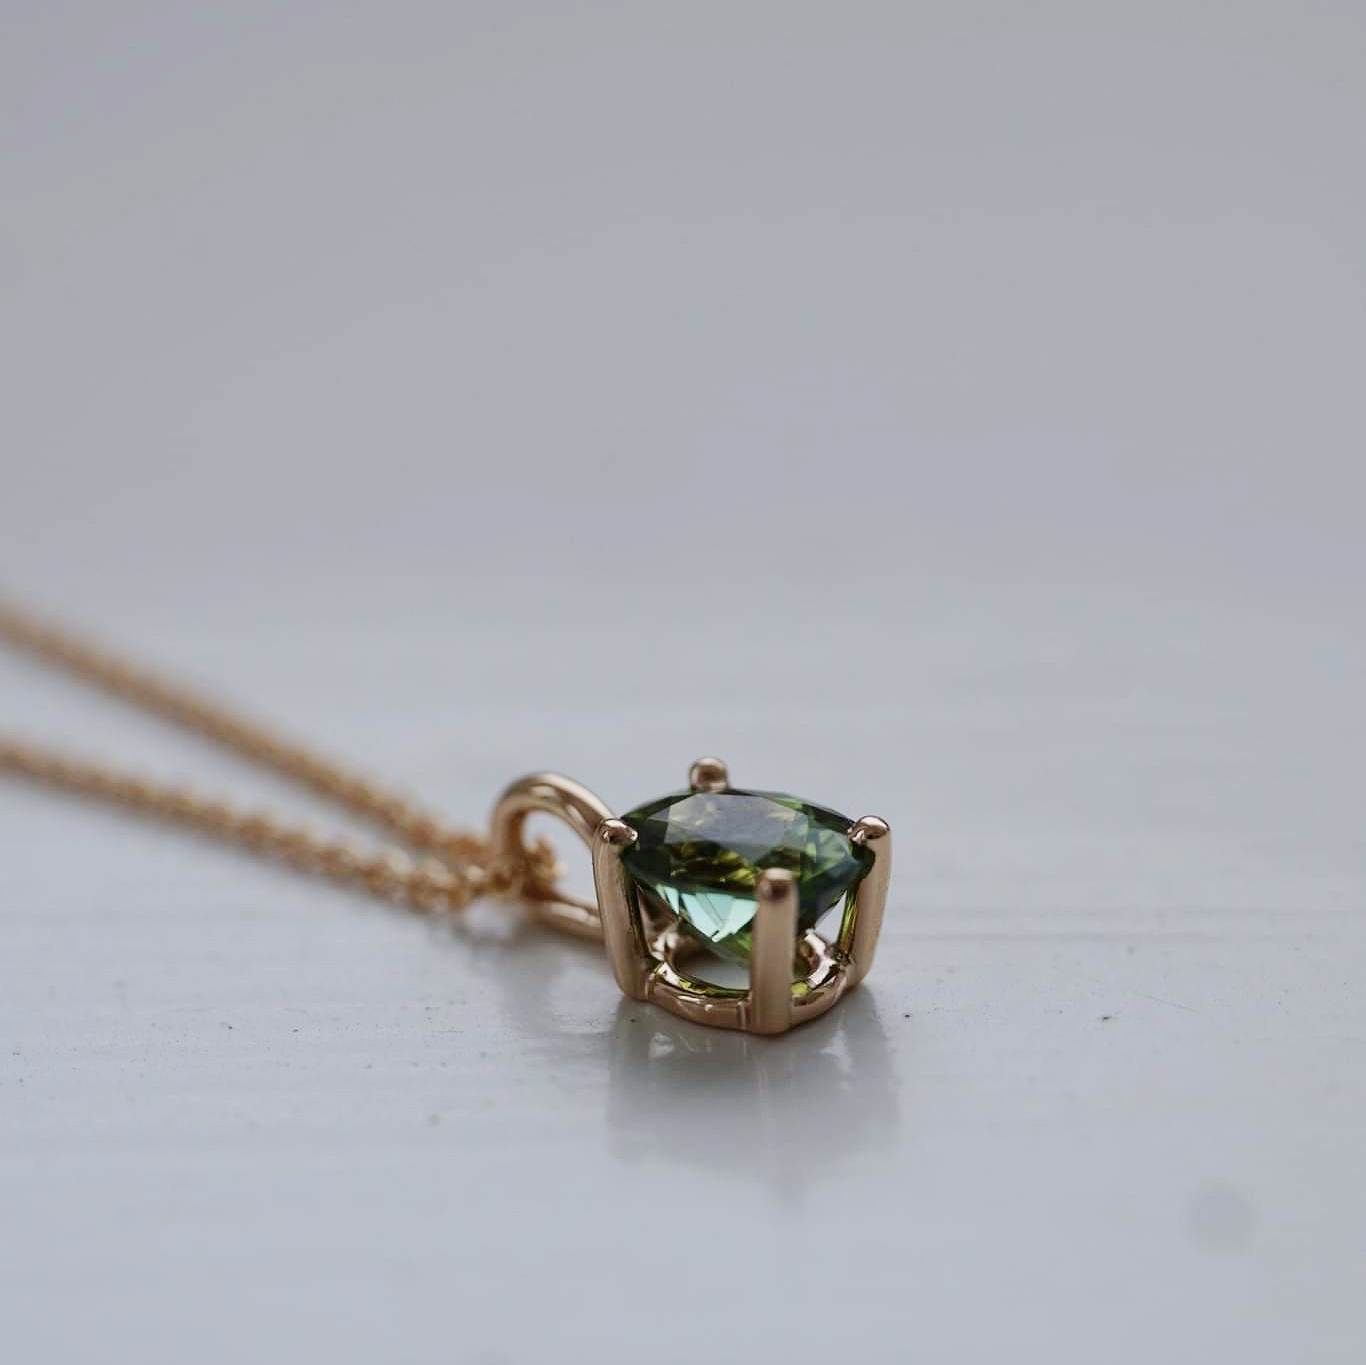 Oval tourmaline pendant in gold